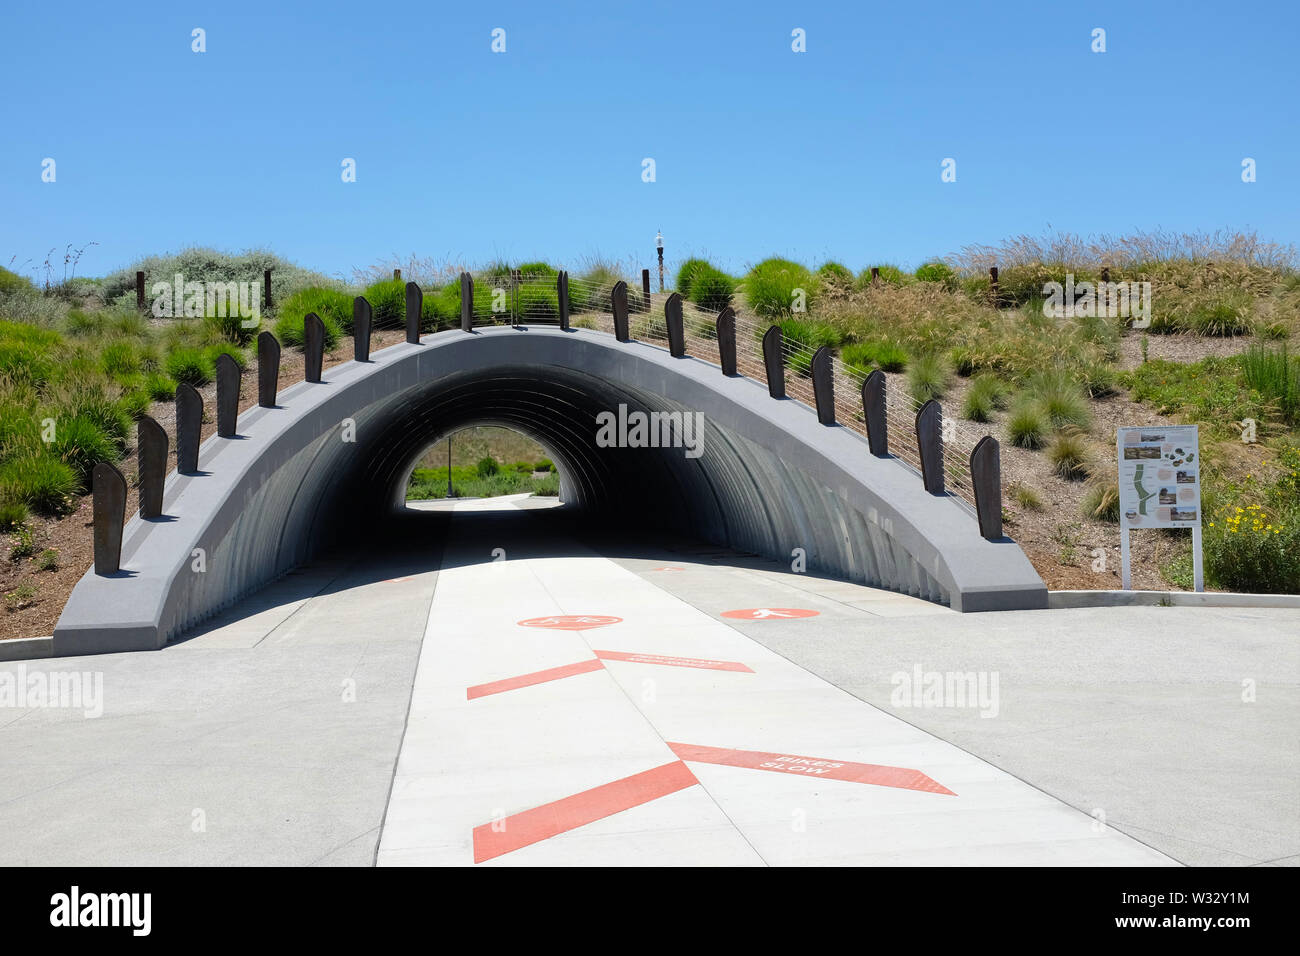 IRIVNE, CALIFORNIA - JULY 11, 2019: The Cultivate underpass allows pedestrians and cyclists to travel unimpeded in the Bosque open space area of the G Stock Photo